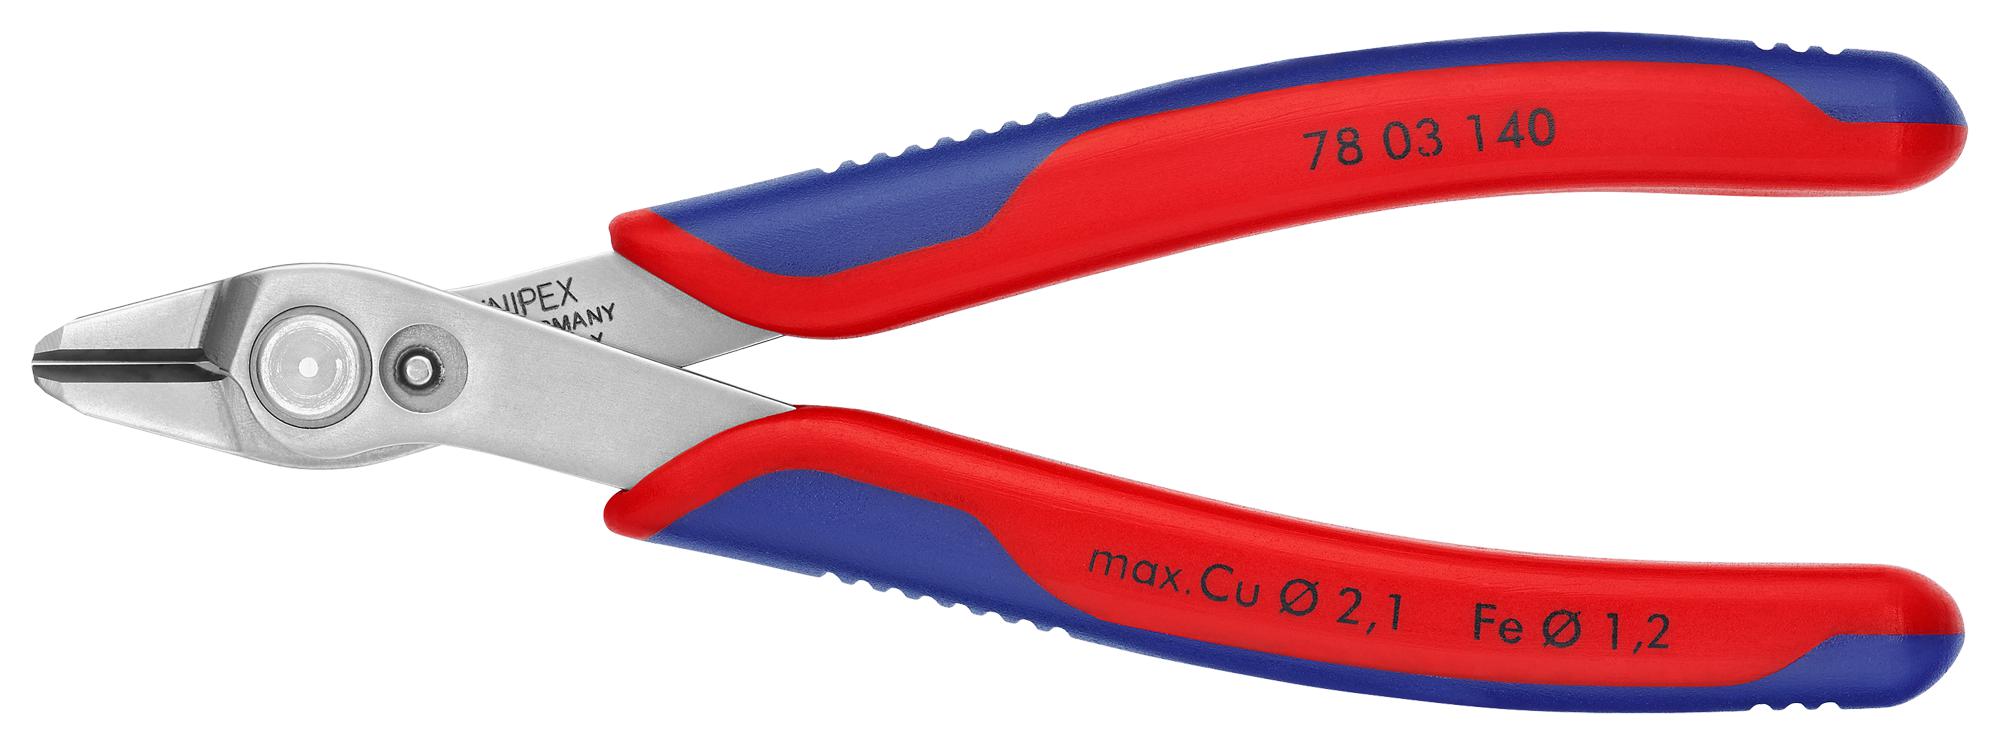 78 03 140 WIRE CUTTER, SHEAR, 2.1MM, 140MM KNIPEX